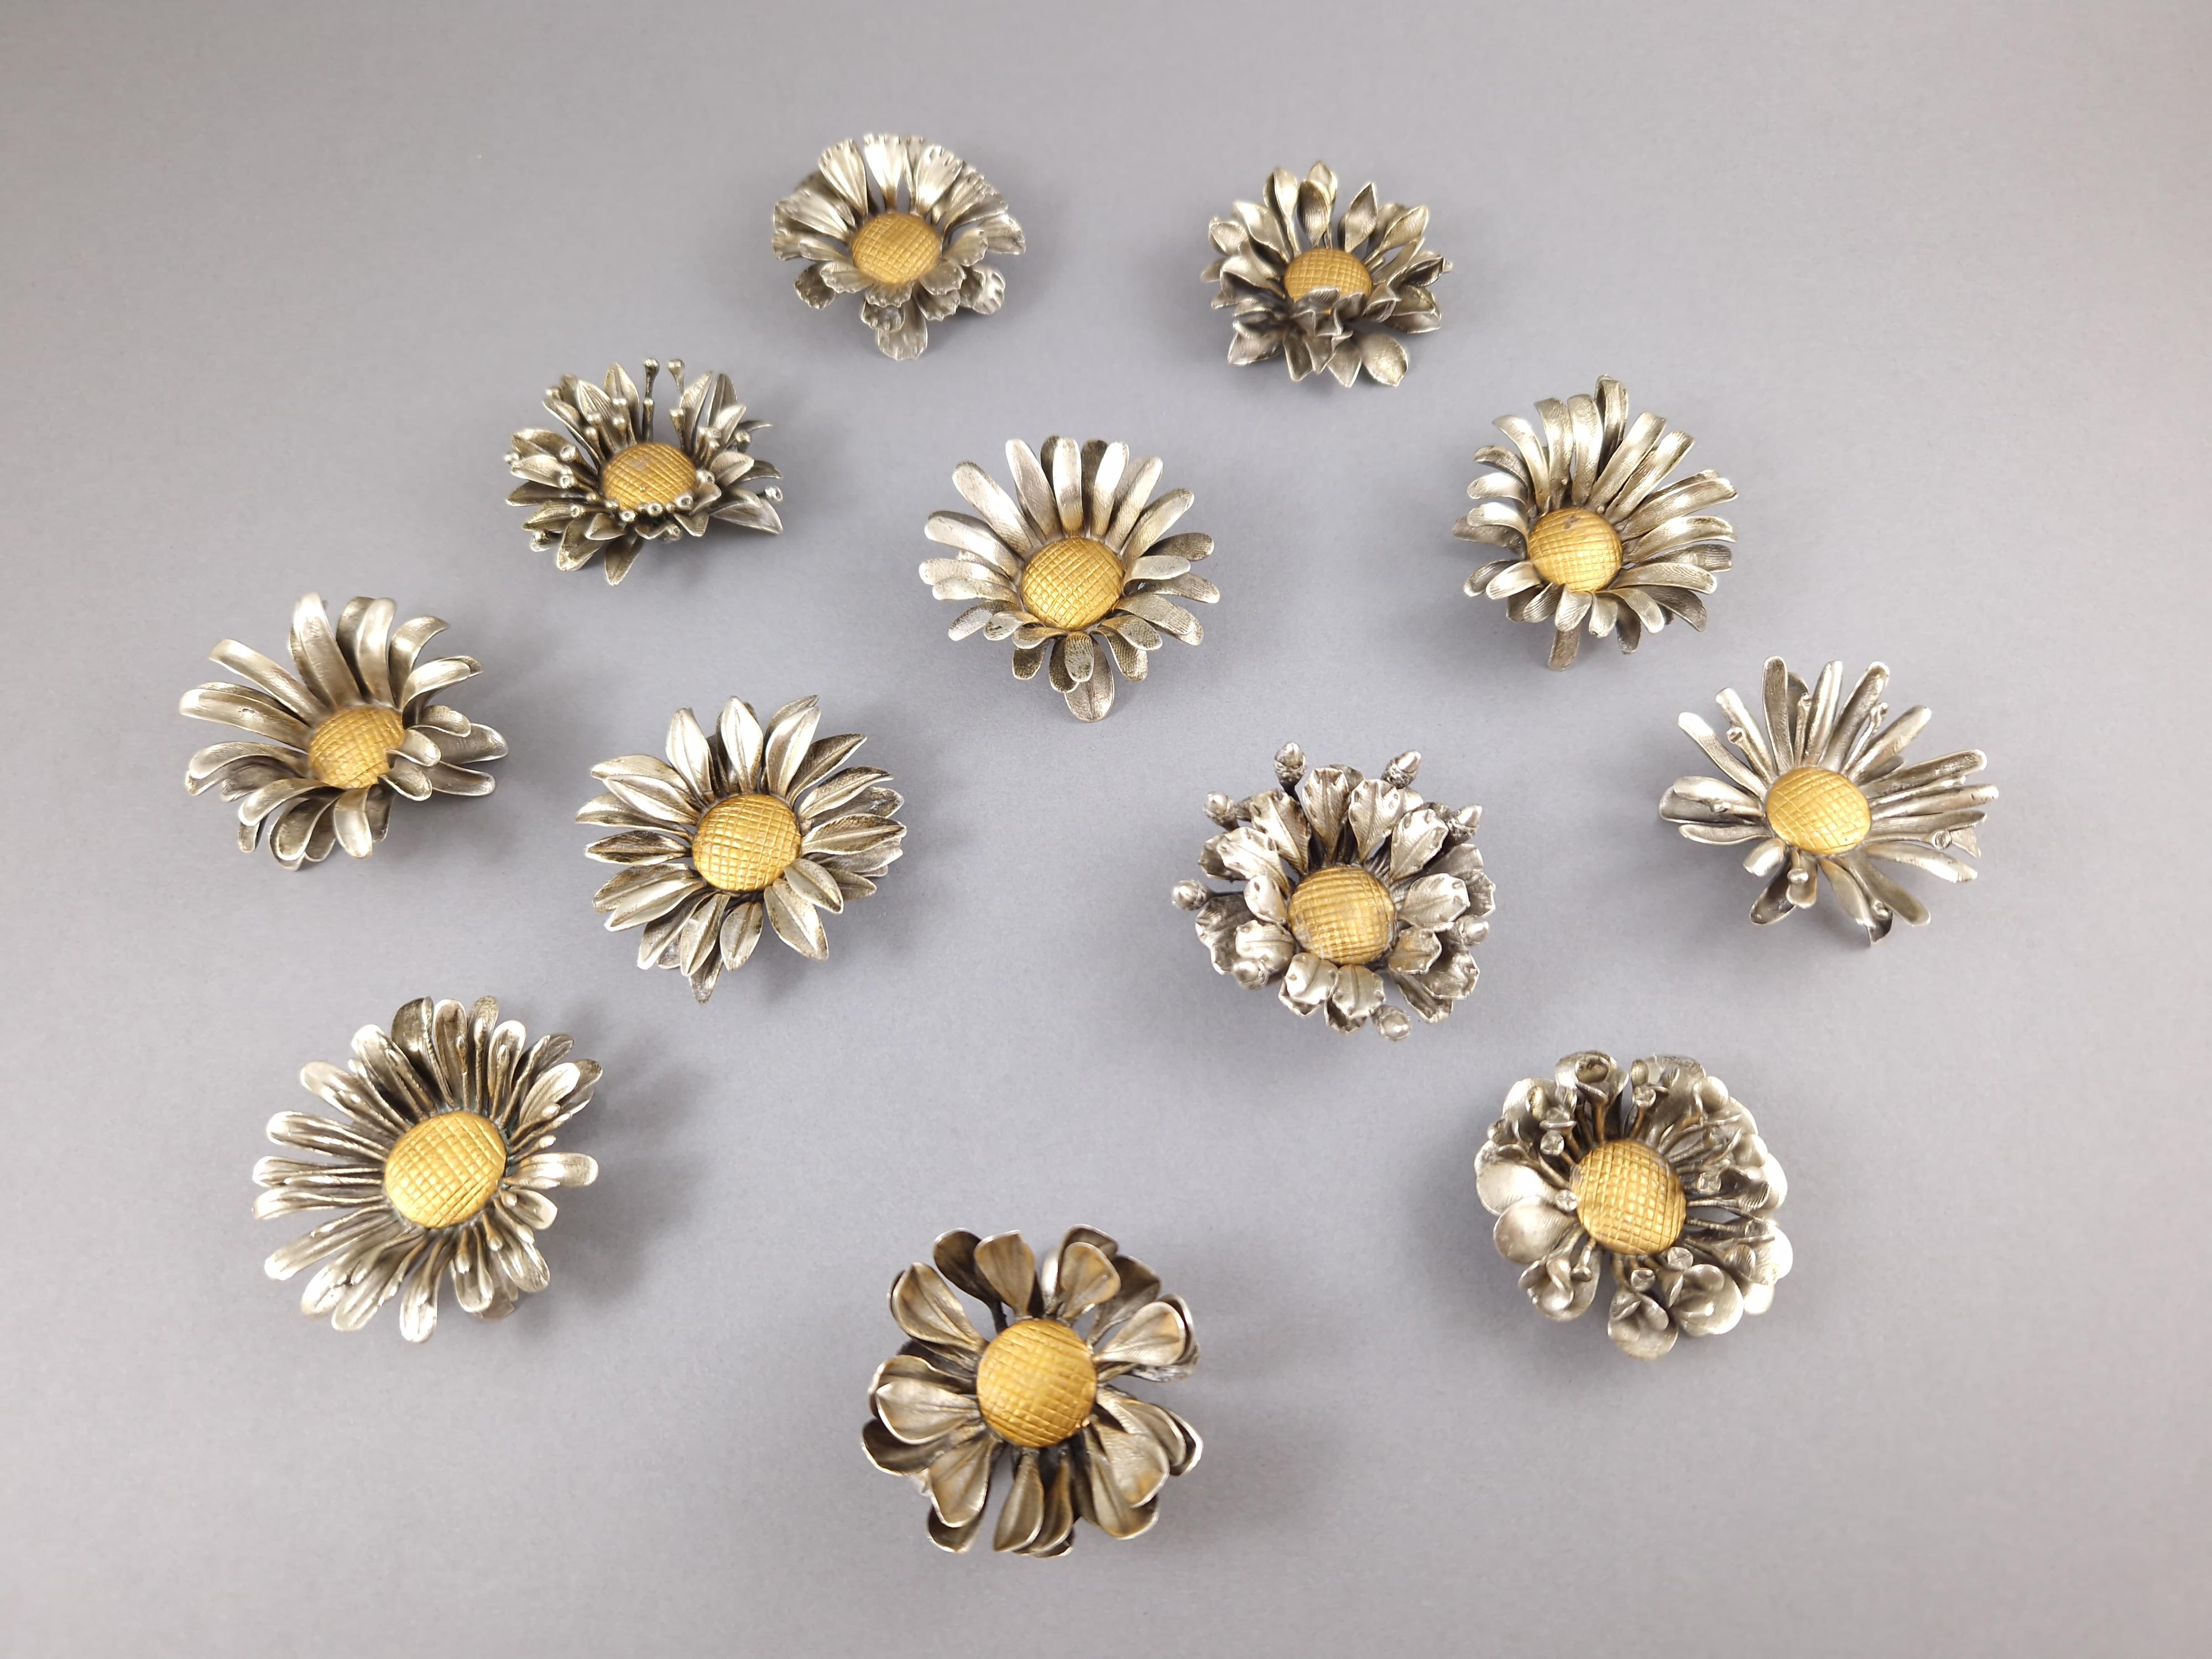 Beautiful set of 12 place card holders or table decorations in solid silver and gilt in the shape of flowers 

800 silver hallmark 
Italian work around 1970 

Height: 2 cm 
Diameter between 4.2 and 5 cm 
Weight: 395 grams

Great condition.